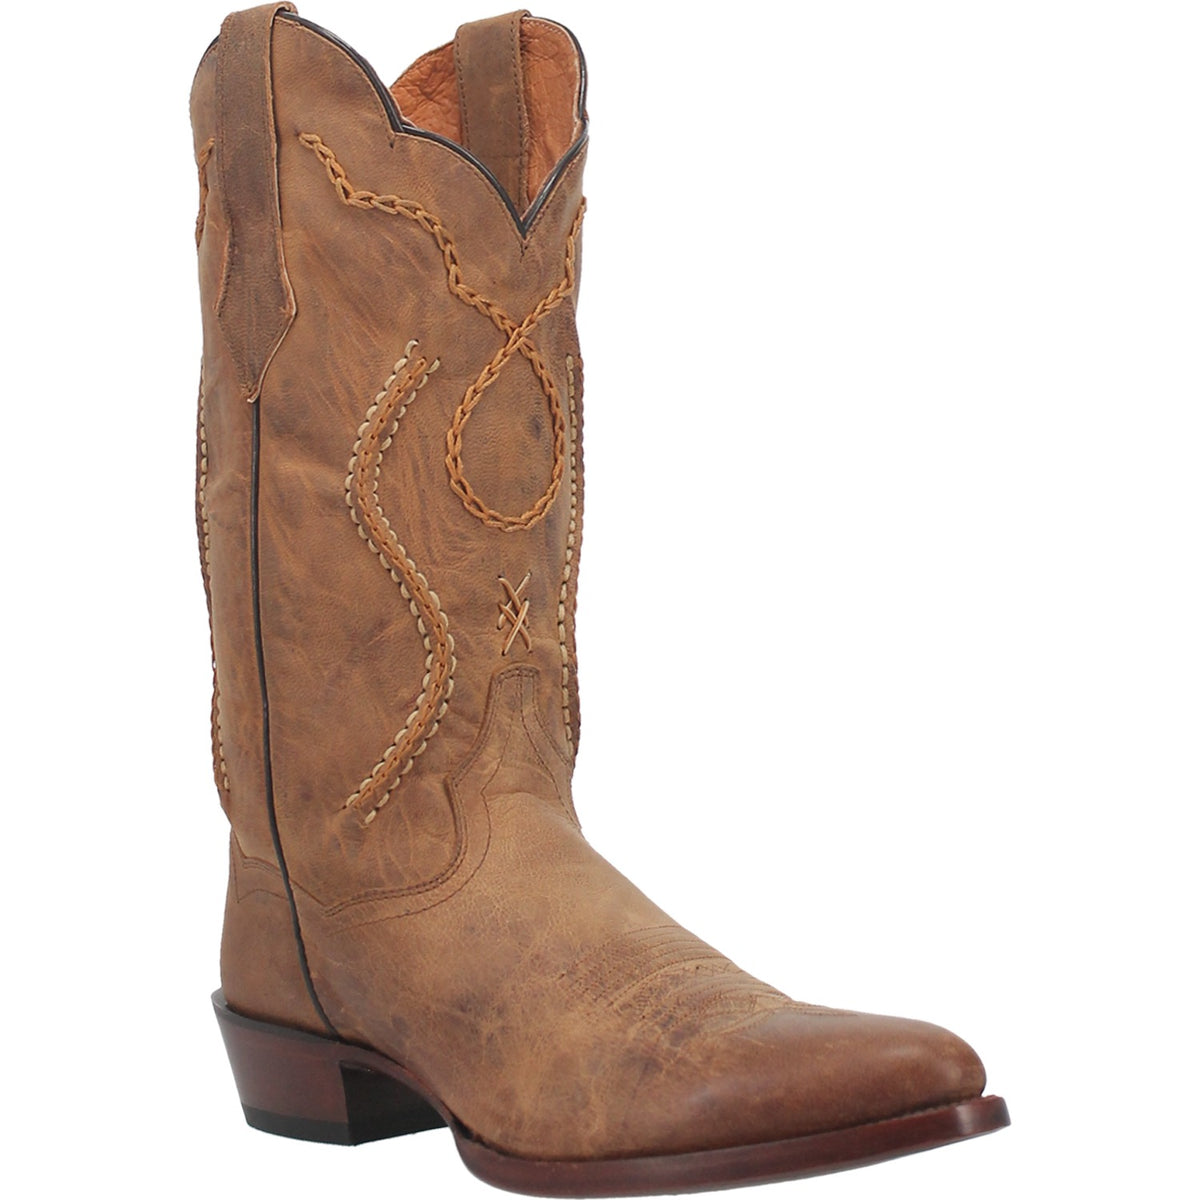 ALBANY LEATHER BOOT Cover